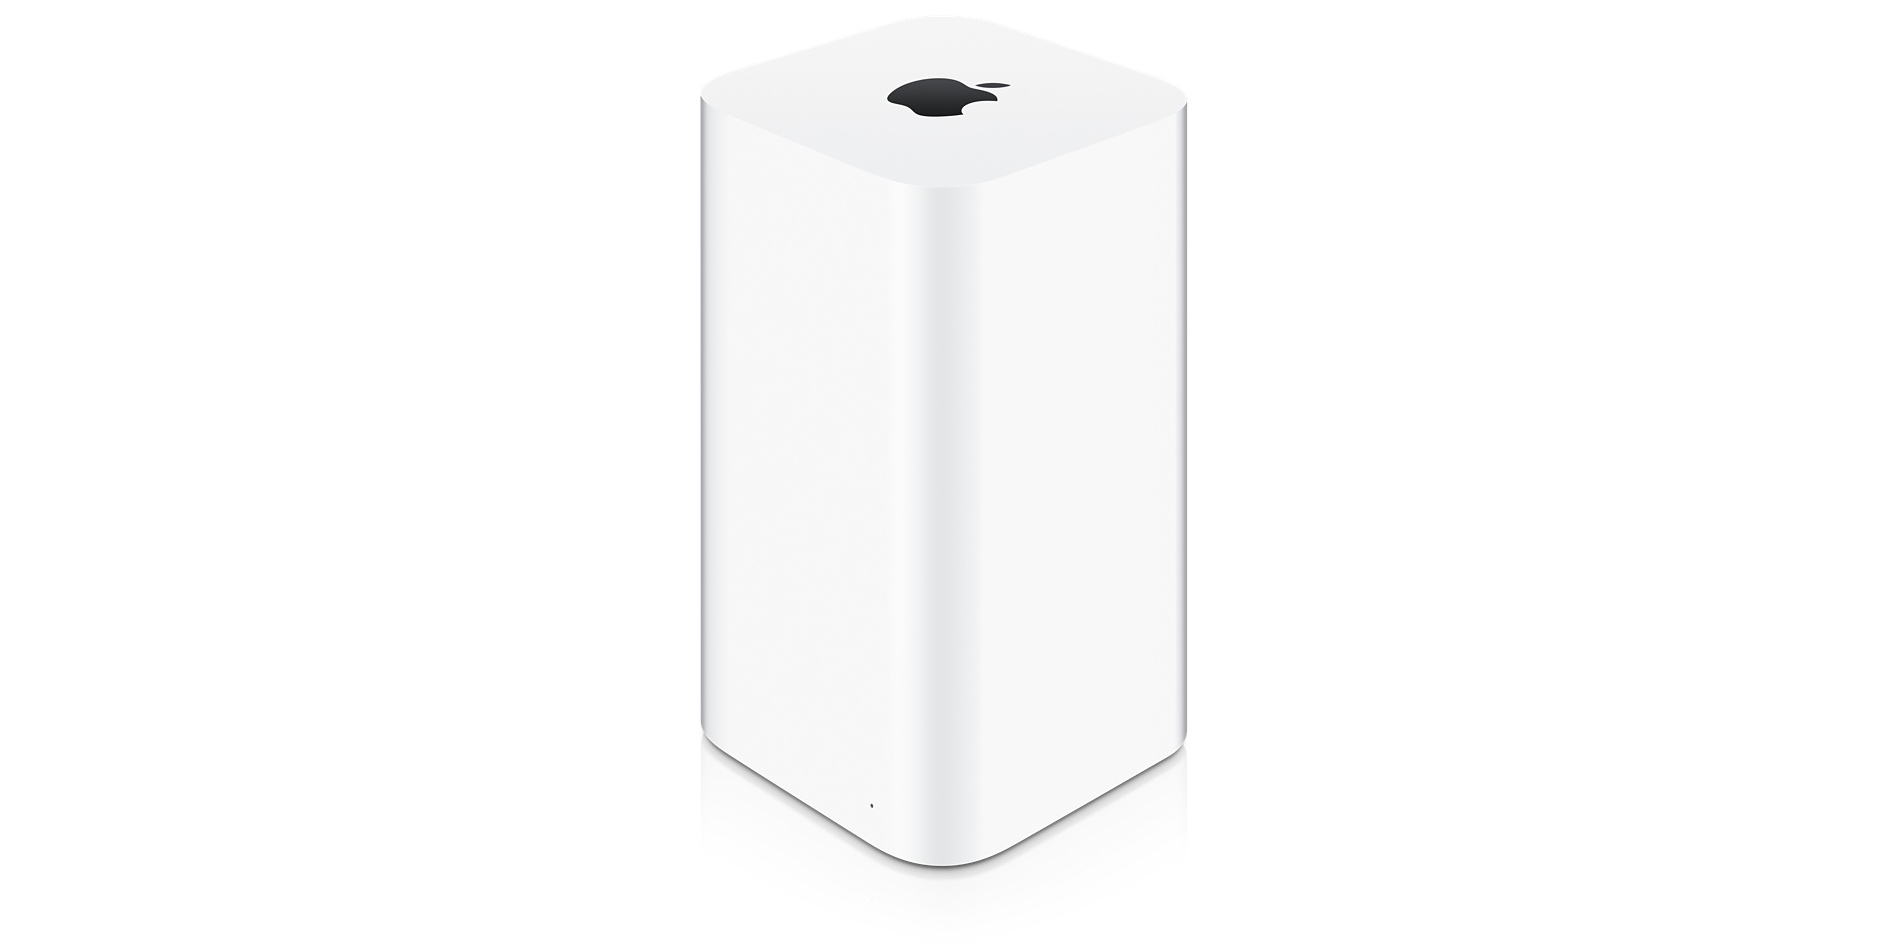 apple airport extreme ports